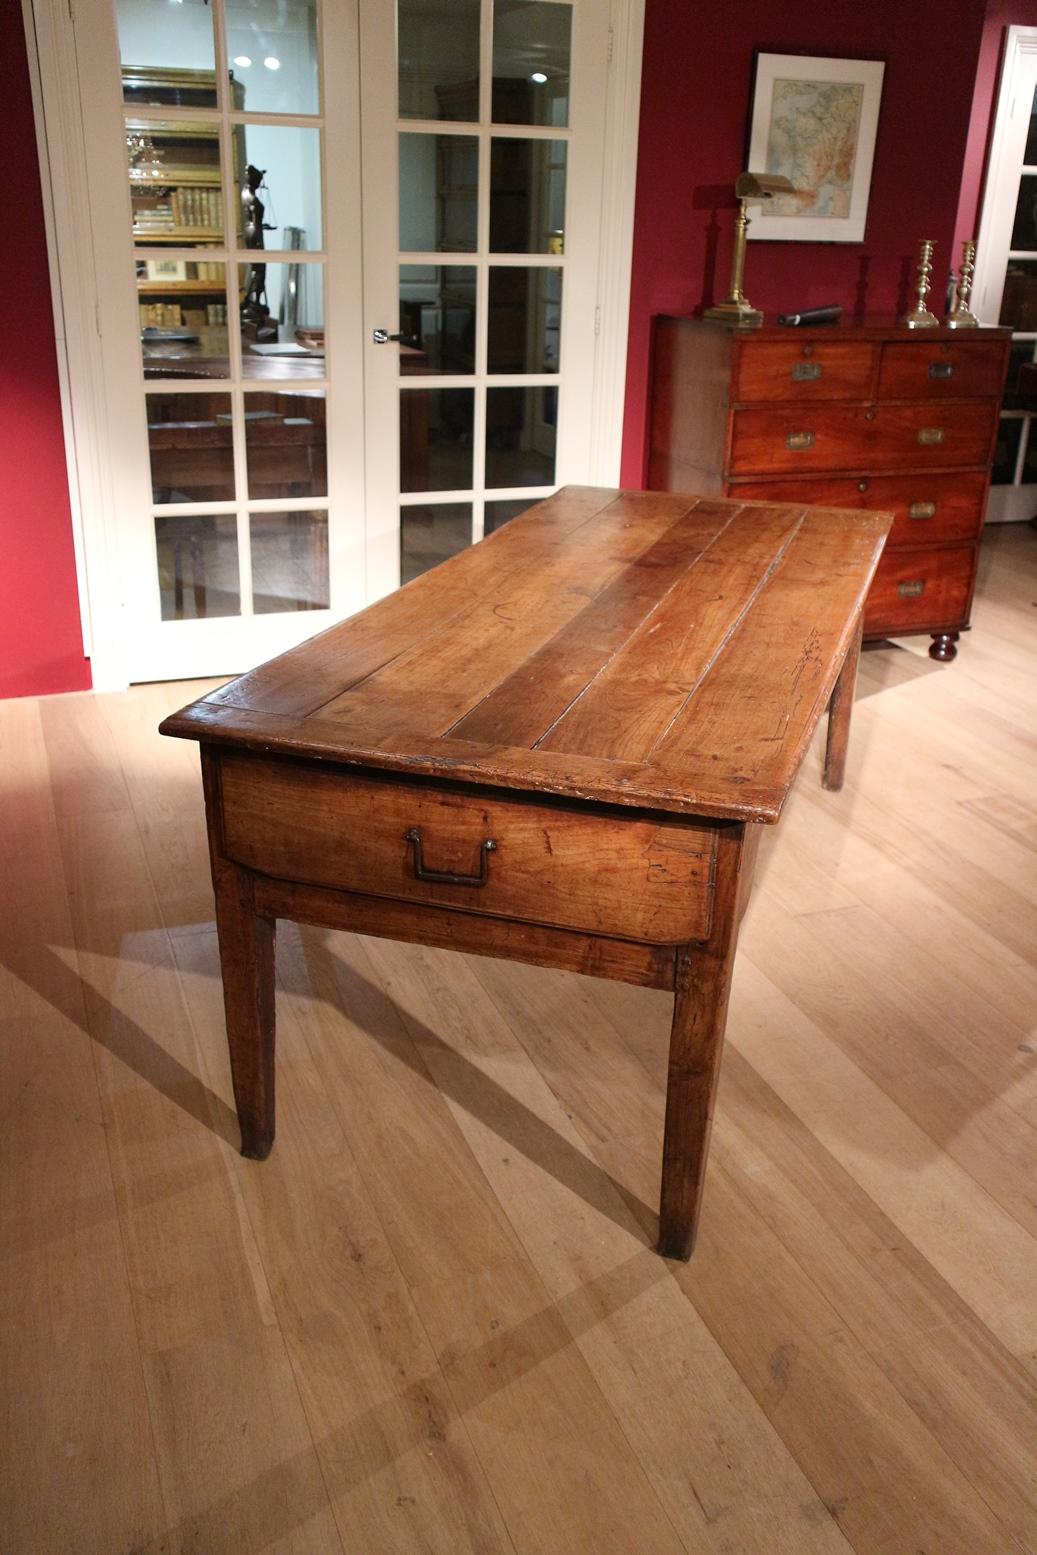 Beautiful 18th century cherrywood dining table. Table has one large drawer and two small ones. The table is in perfect condition considering its age. It has a wonderful rich color and superb patination. The old woodworm gives the table a beautiful